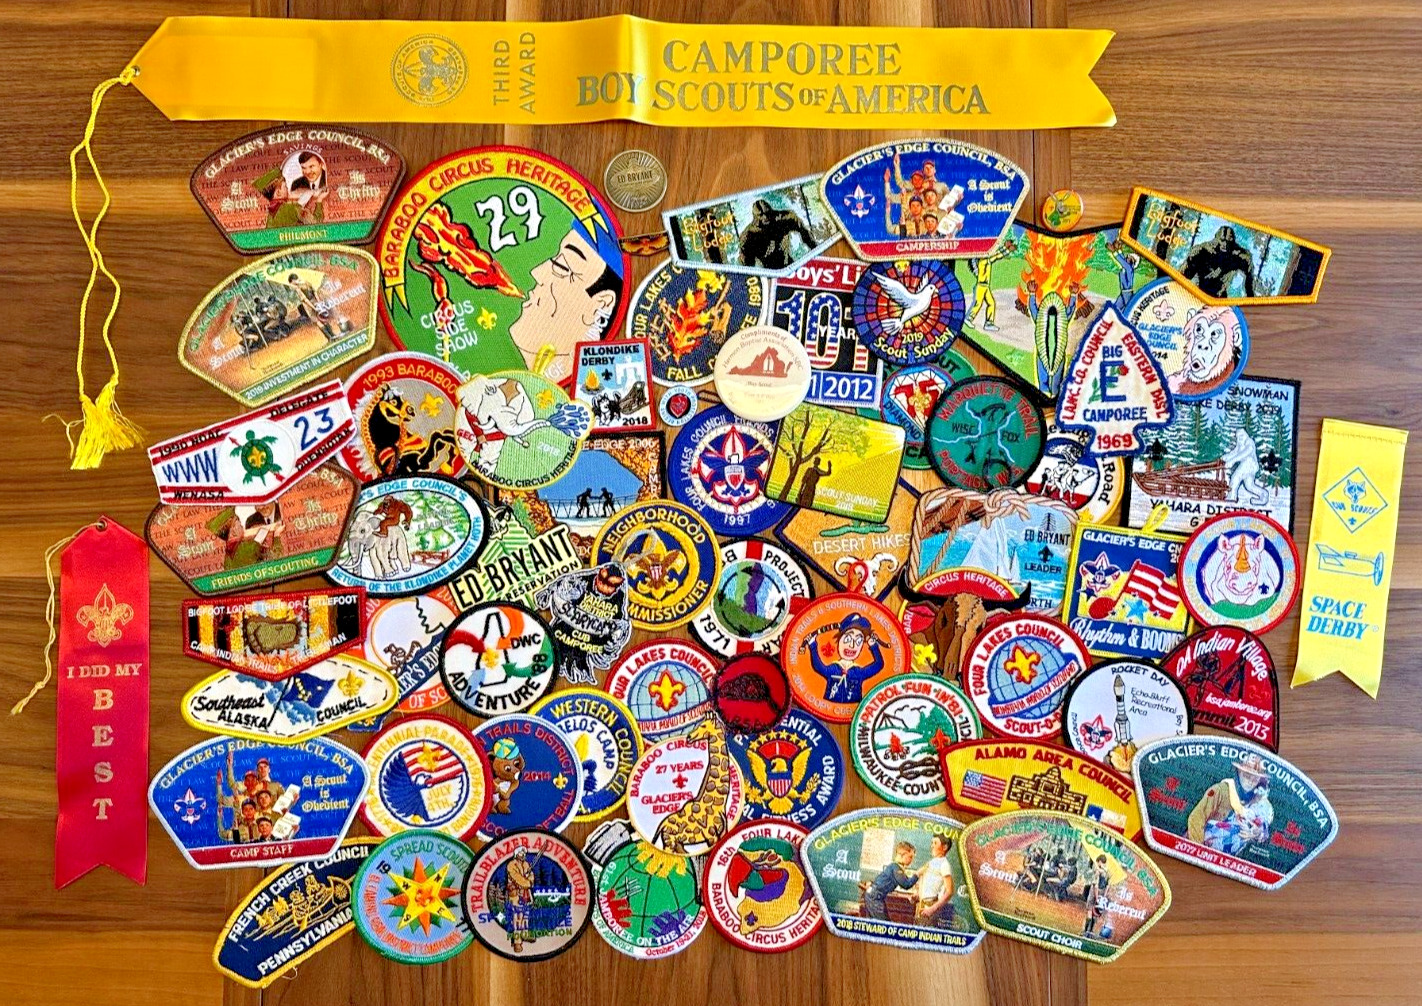 Large Collection of Boy Scout Memorabilia Patches OA Flaps CSPs Ribbons Coin Pin